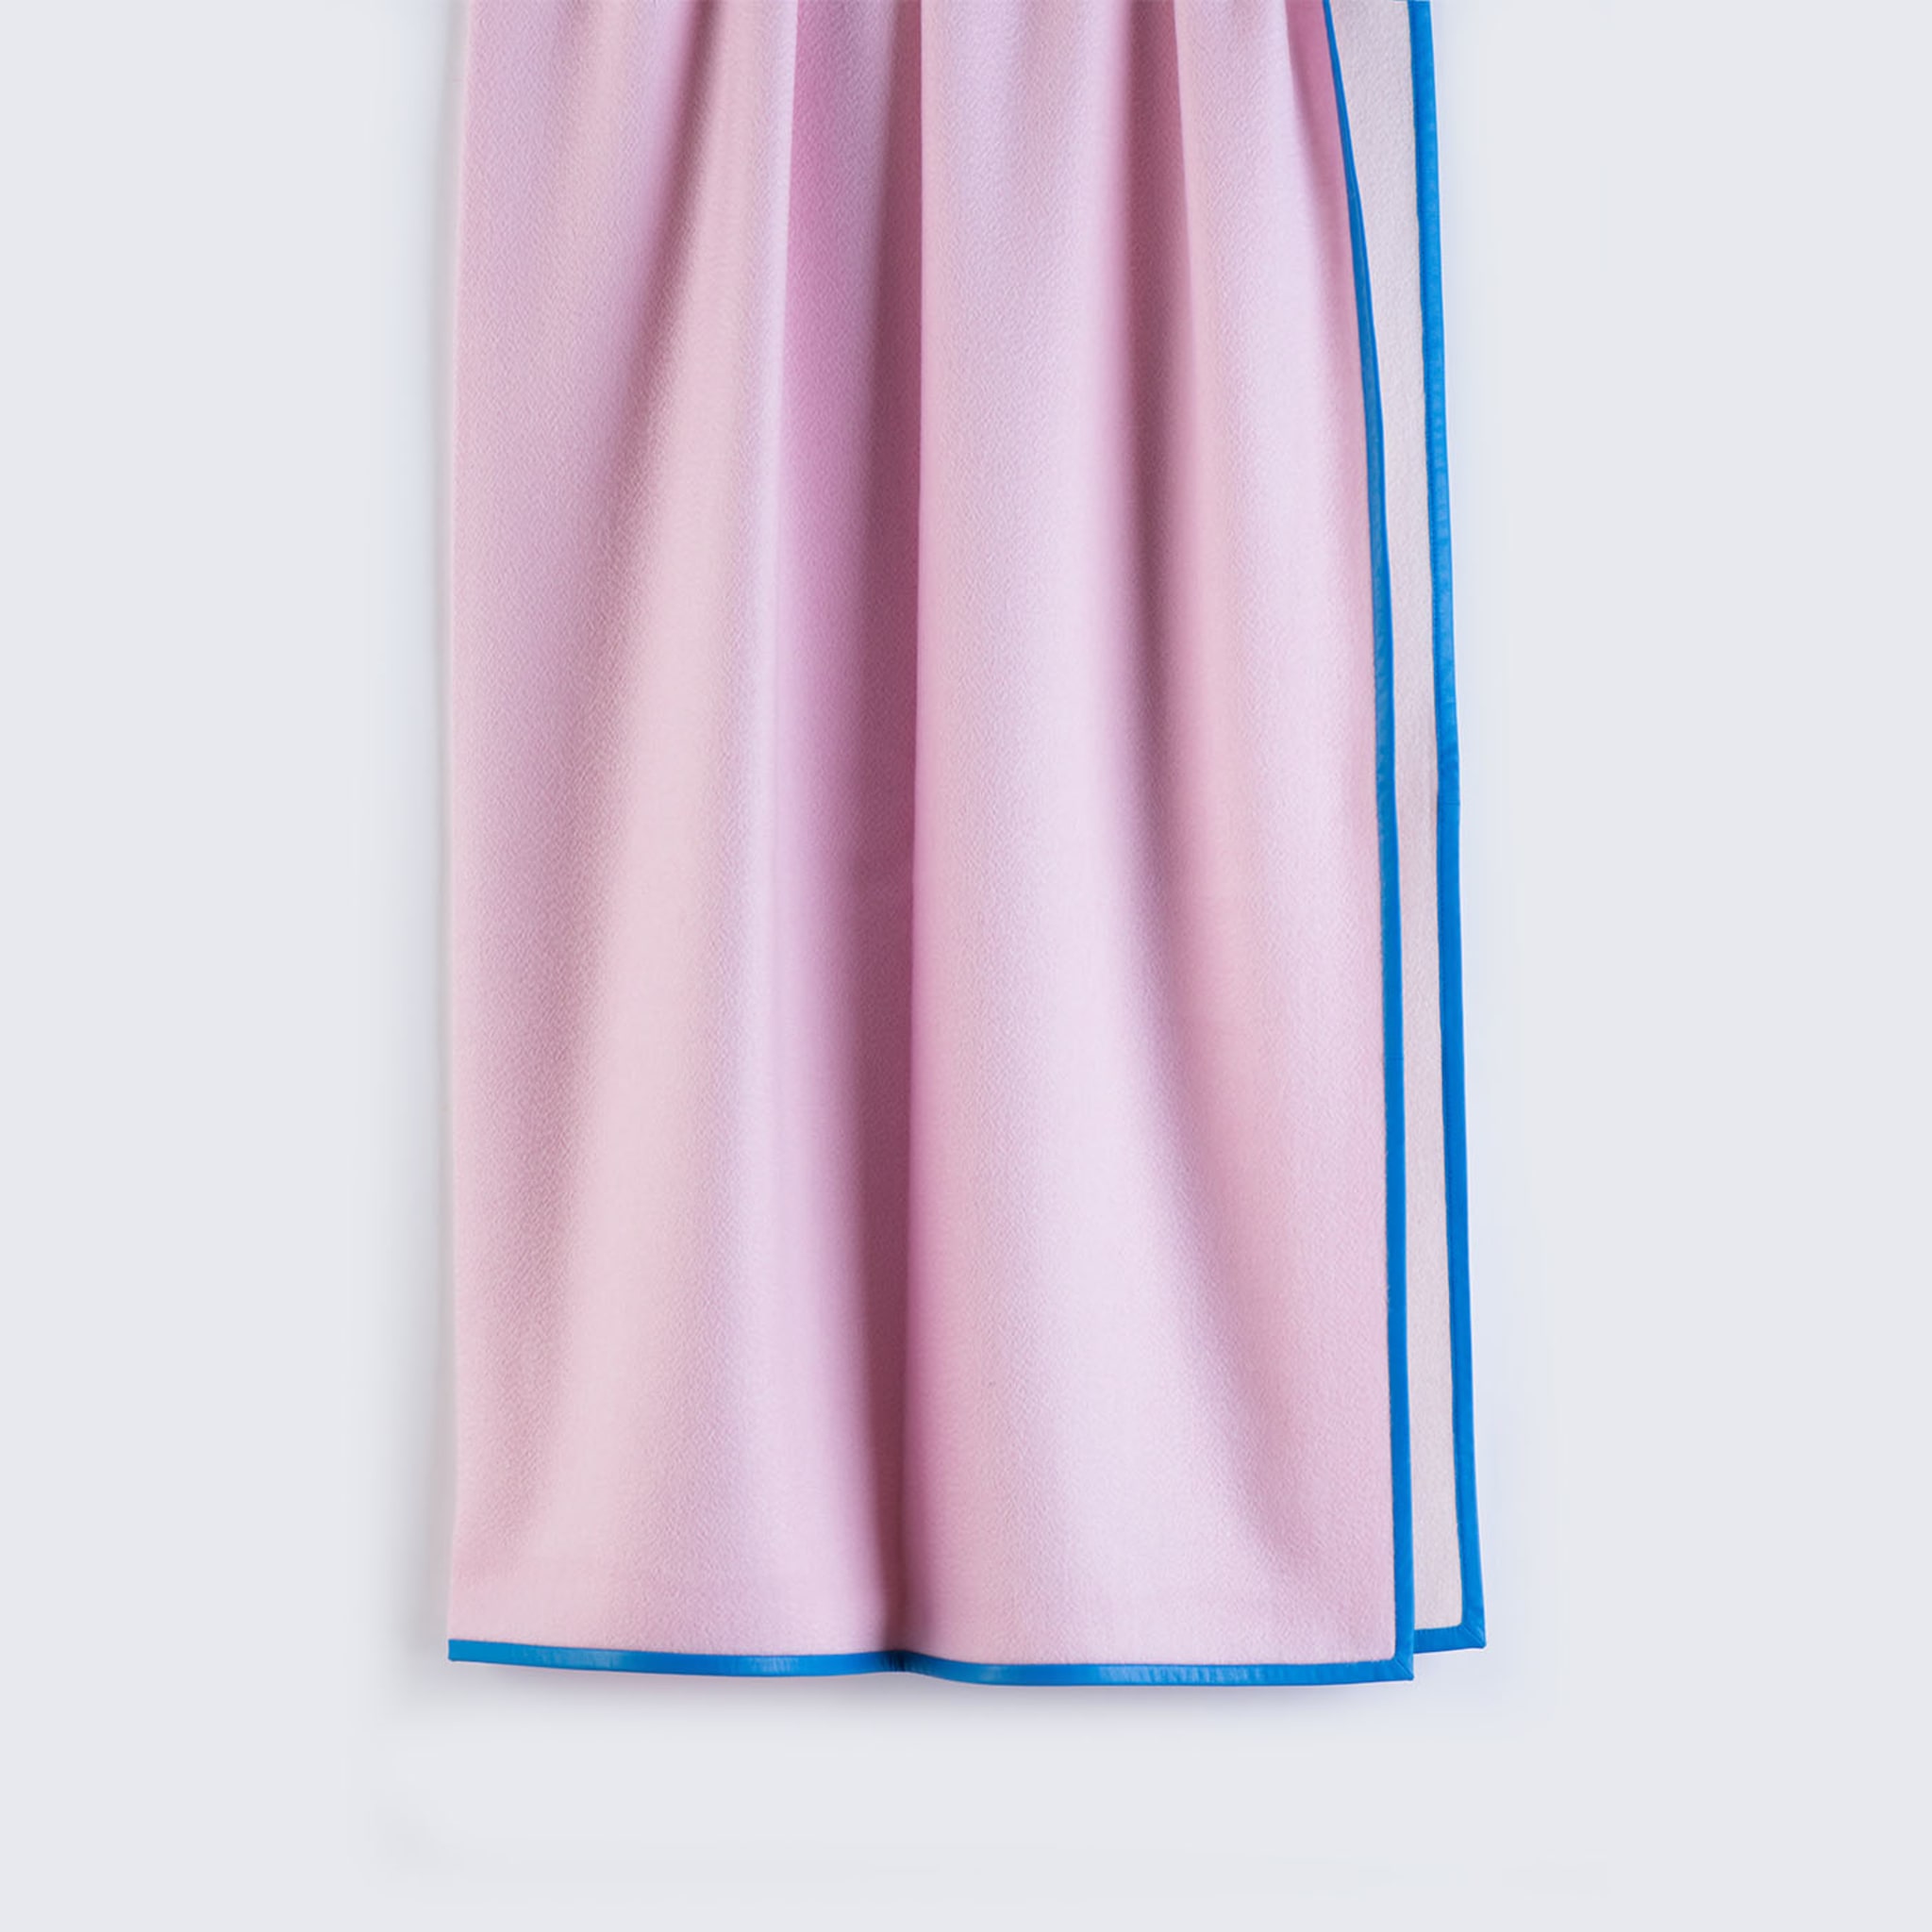 Biella Blue Leather and Pink Blanket - Alternative view 3